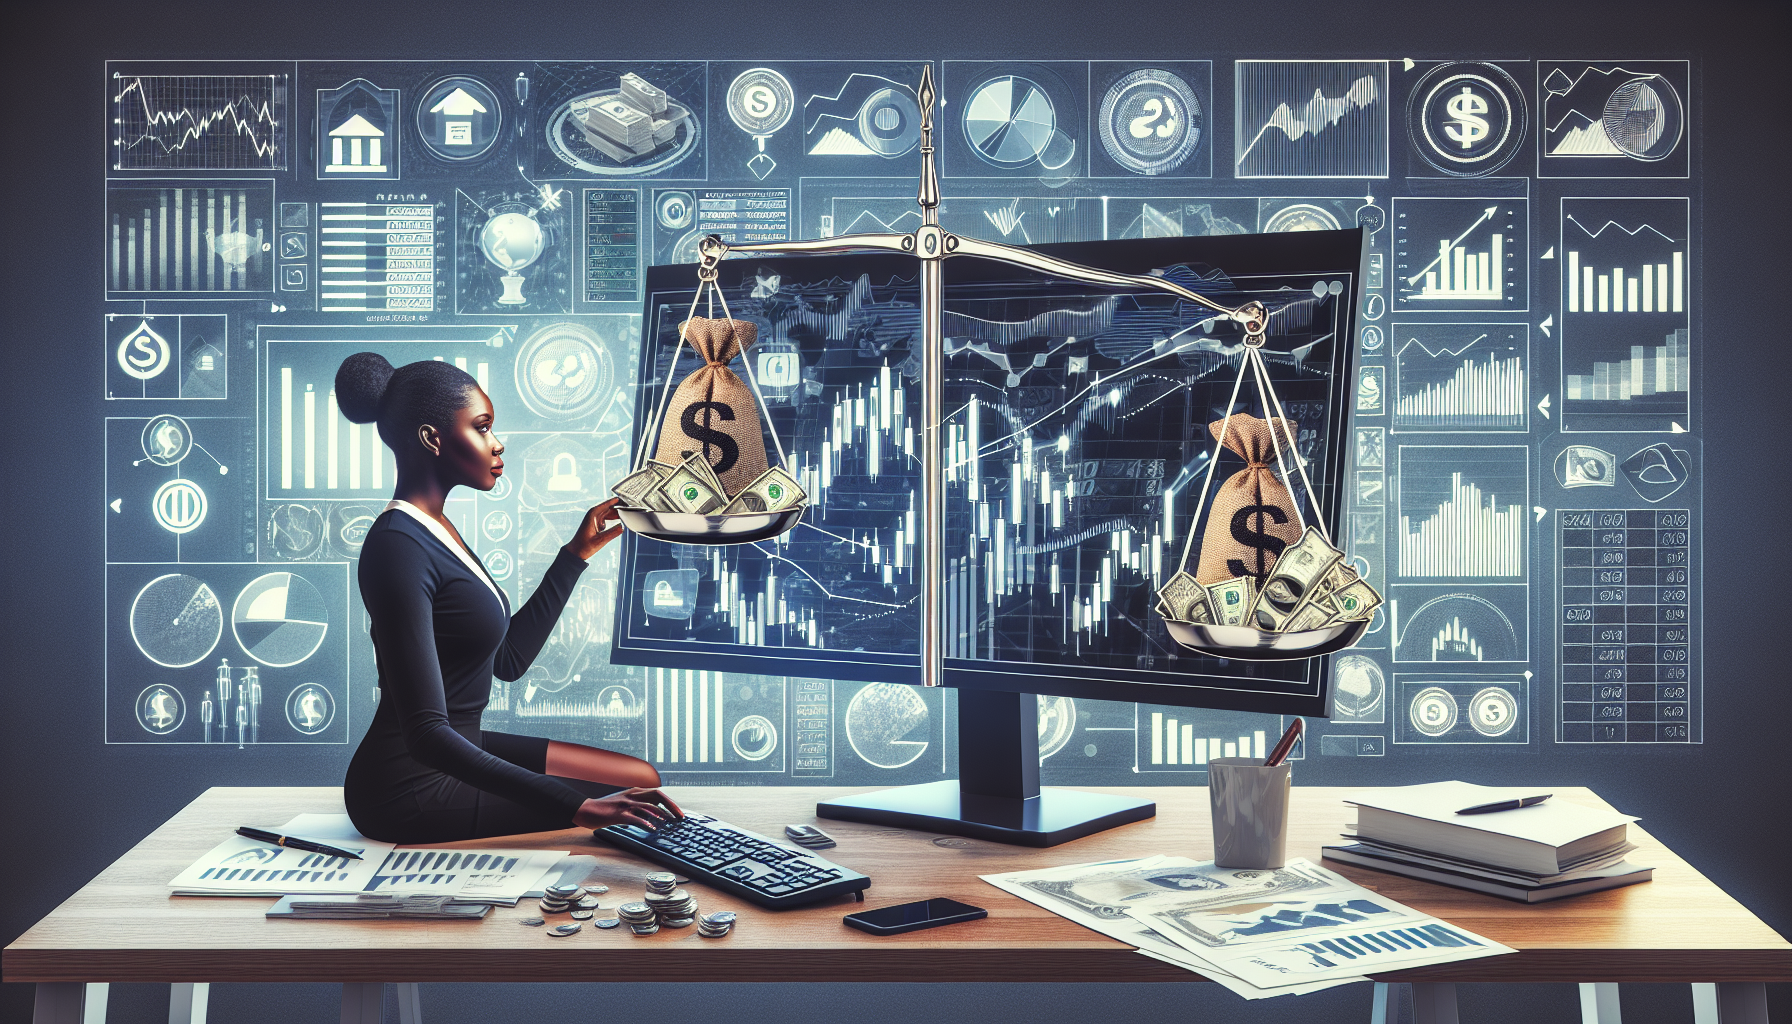 Create an image conceptually illustrating the basics of a margin account in finance. Show a businessperson at a desk with a computer screen displaying financial graphs and numbers, indicating stock investments. Include visual elements like a scale balancing money bags and stock certificates on either side, representing the borrowed funds and invested funds. The background should include subtle icons of banks and arrows illustrating the borrowing and returning process. The overall atmosphere should be professional and educational.